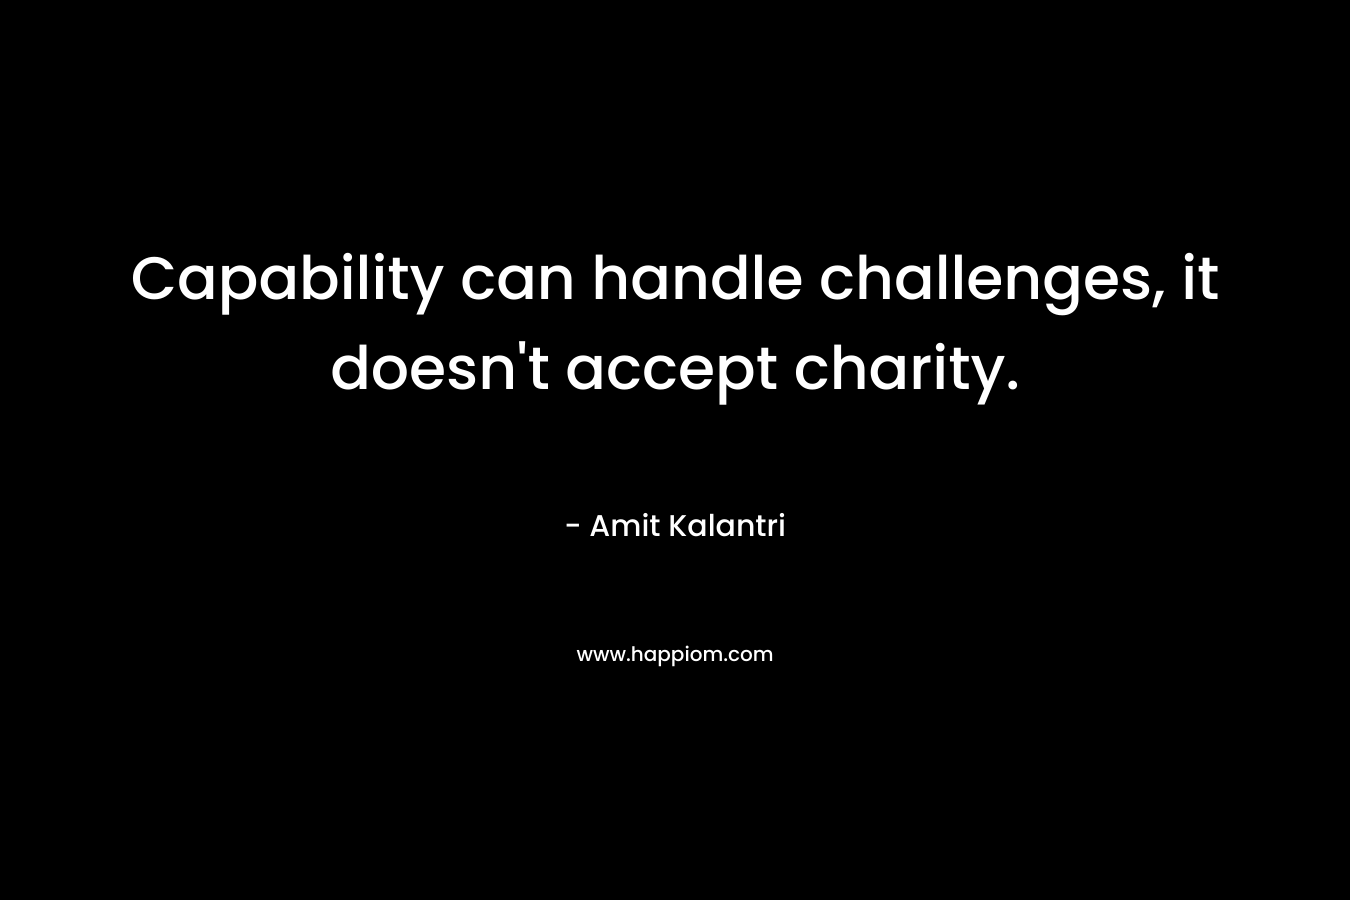 Capability can handle challenges, it doesn’t accept charity. – Amit Kalantri